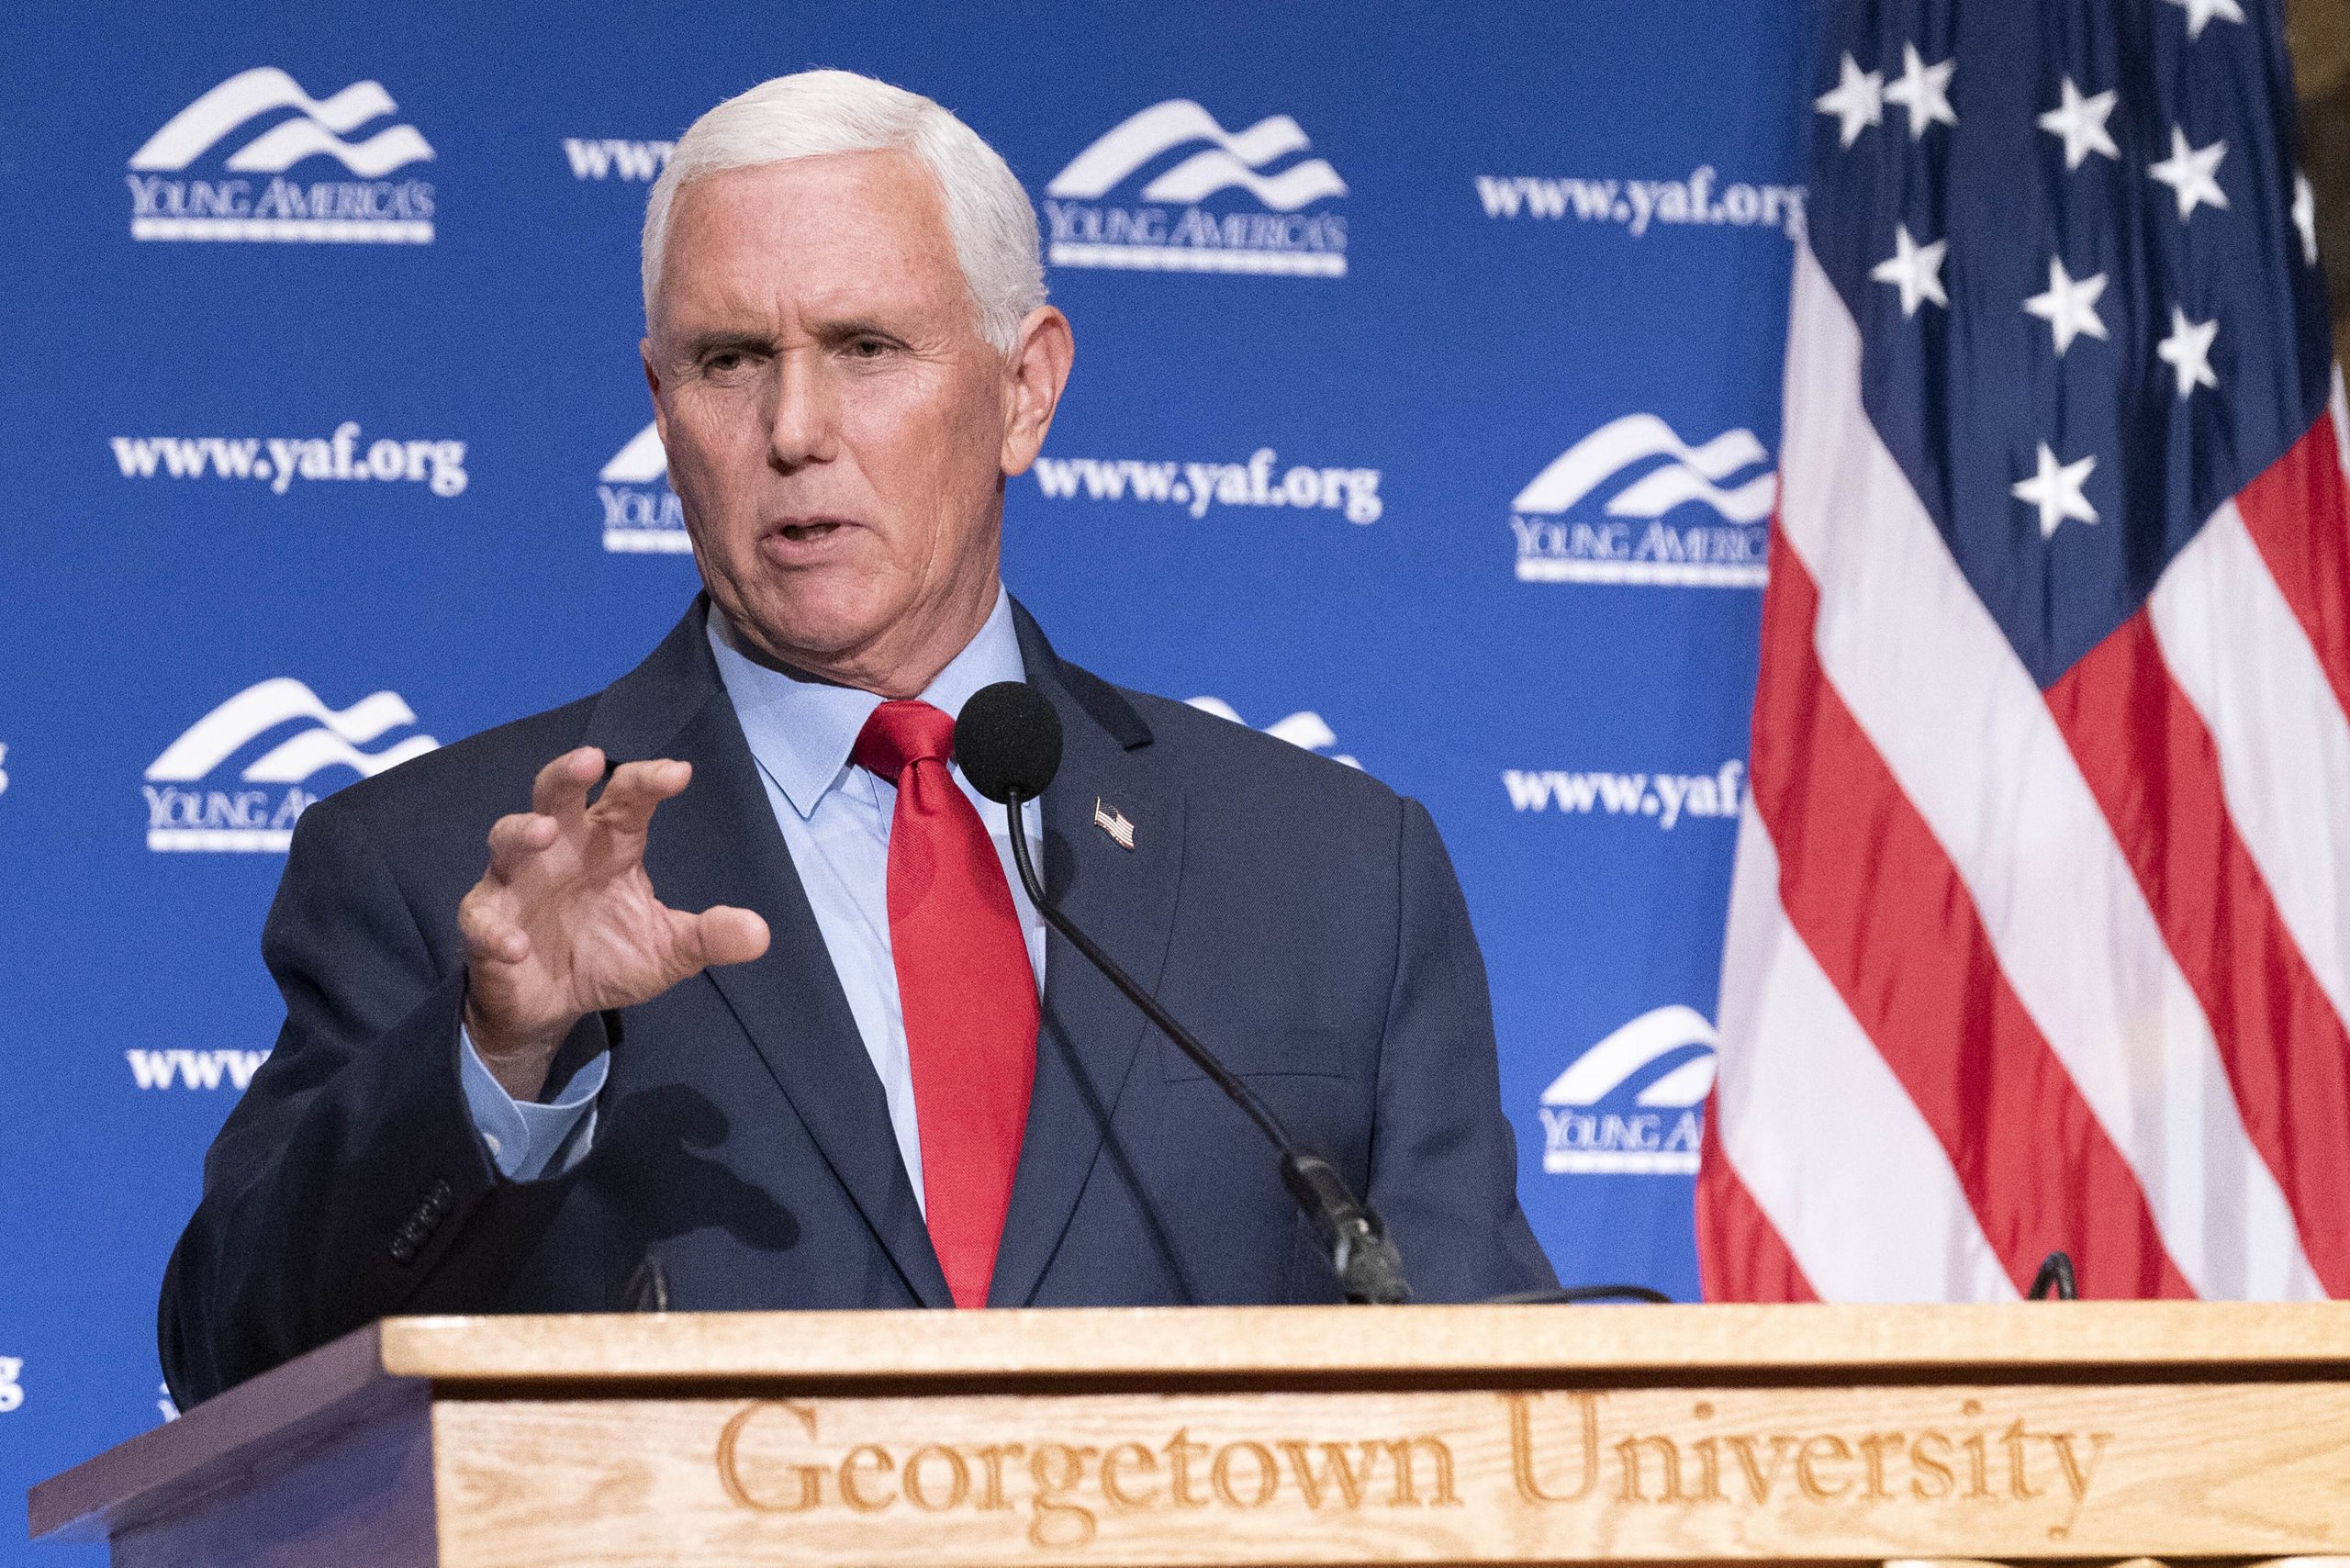 Mike Pence denounces Donald Trump running in 2024: ‘Well have better choices in future’